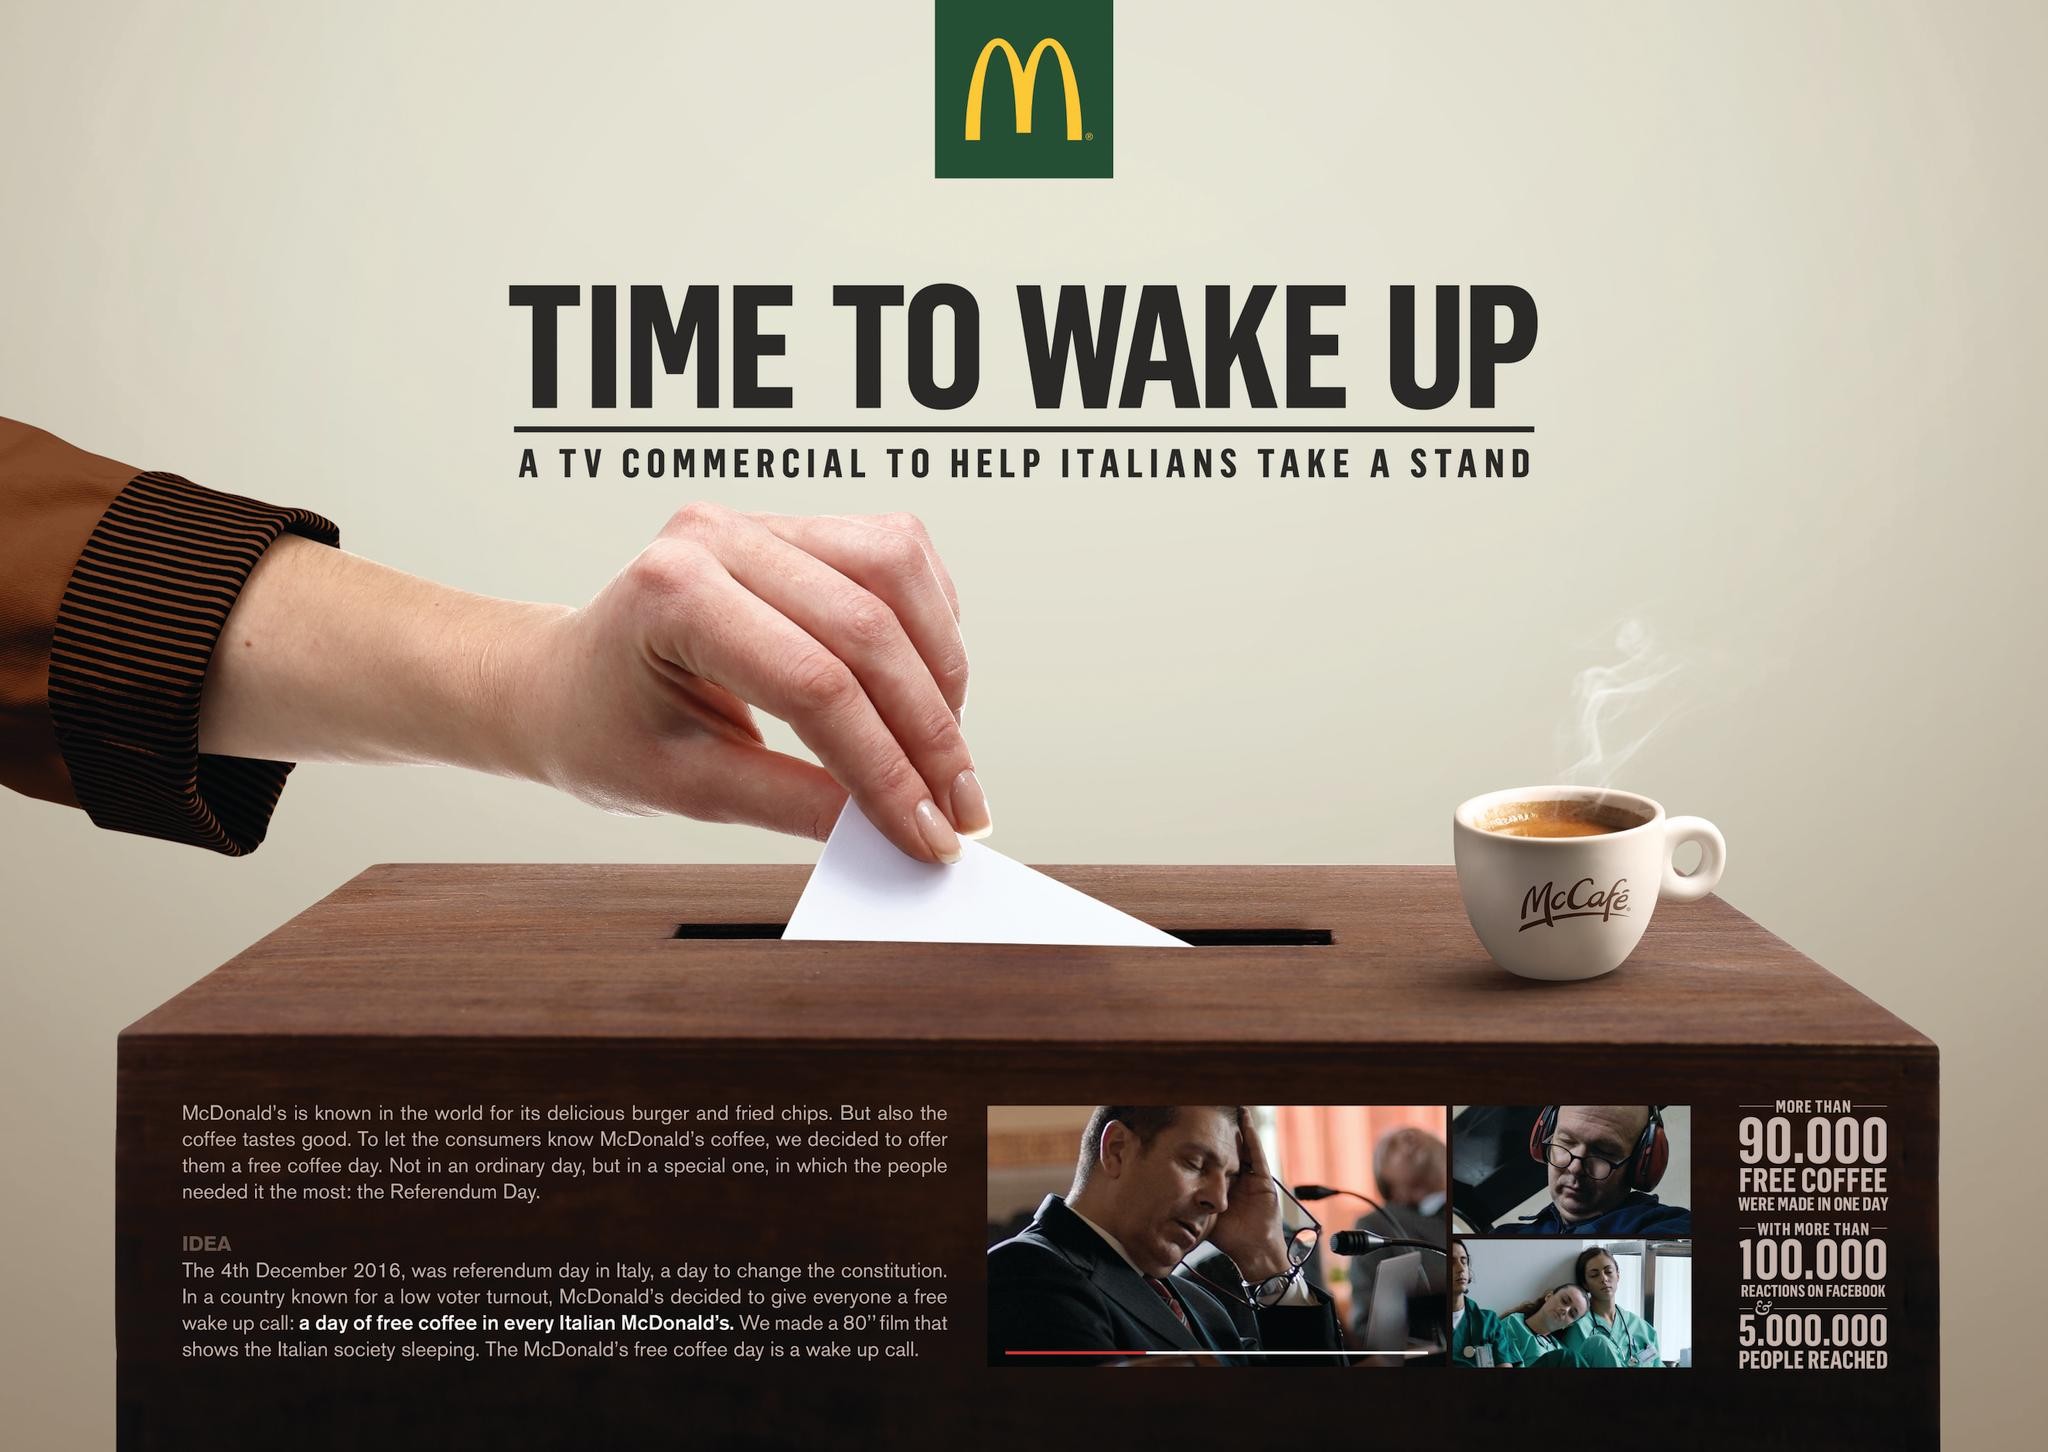 McDonald's - Time to wake up